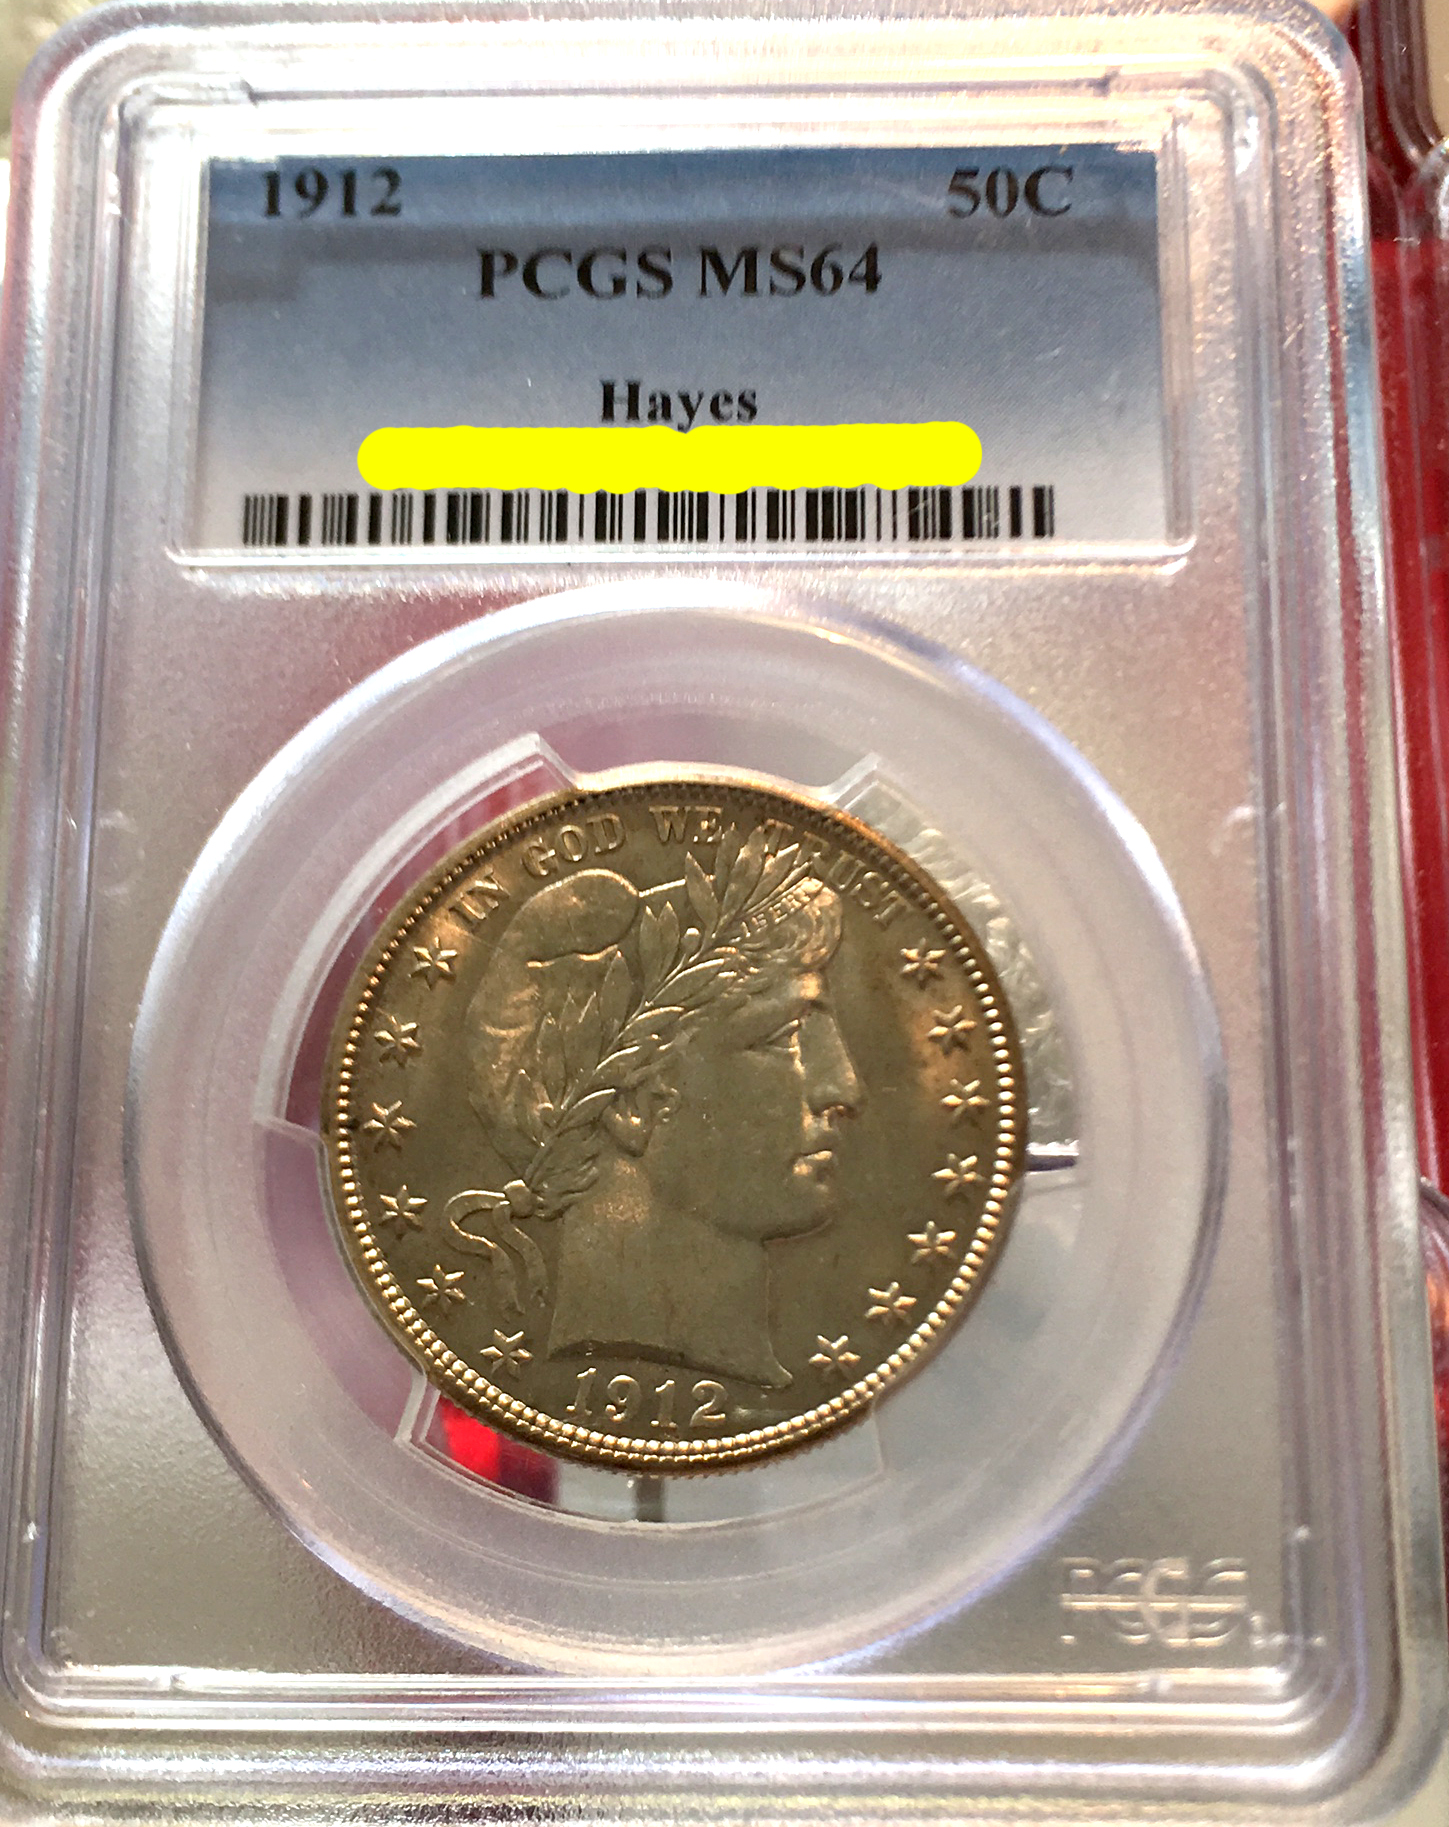 December 2016 Coin Show 1912 Barber Half Dollar MS-64 Hayes PCGS